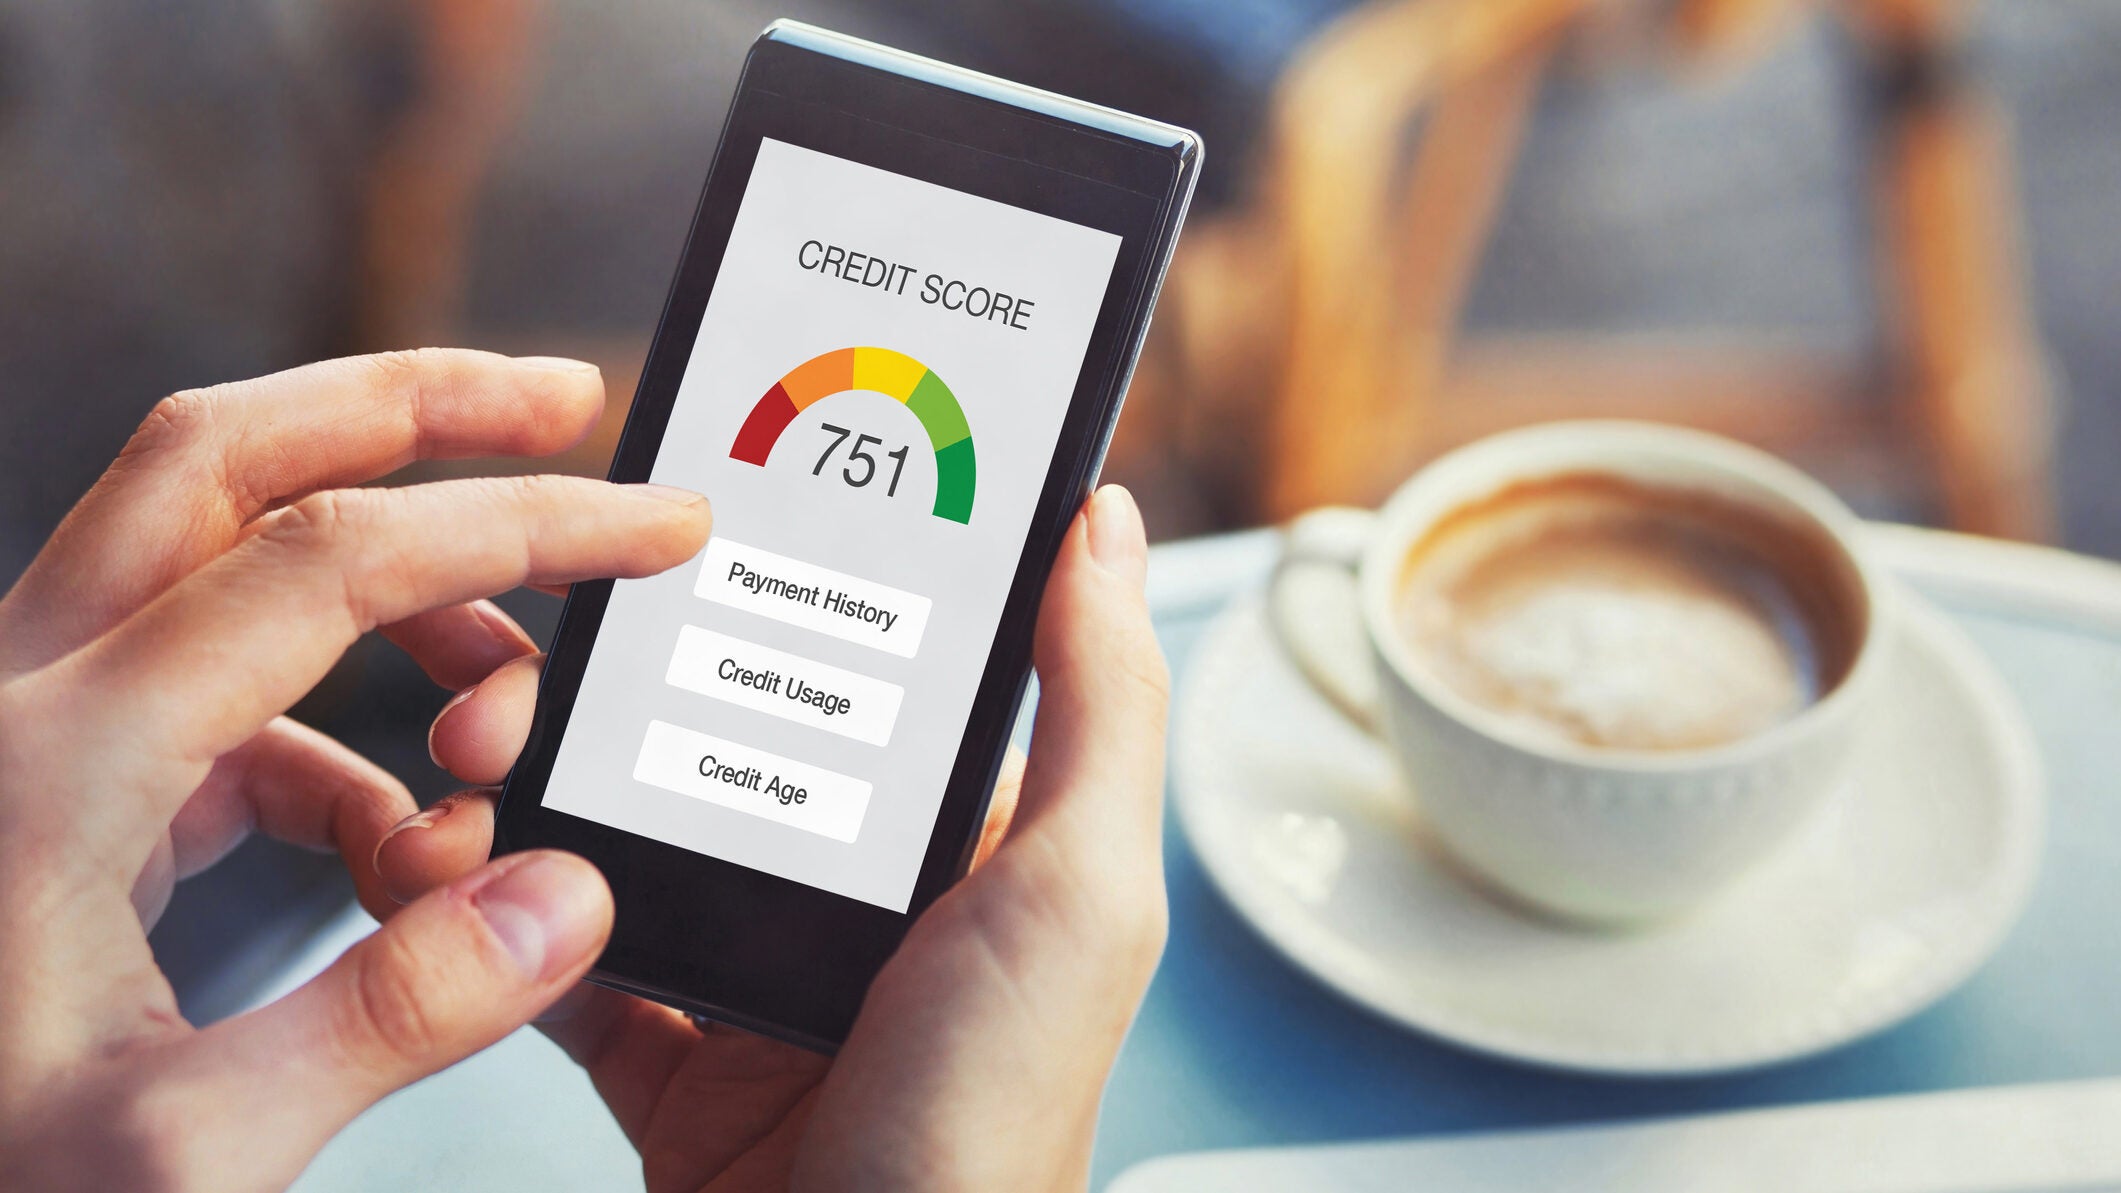 How To Check Credit Score Bank Of America App